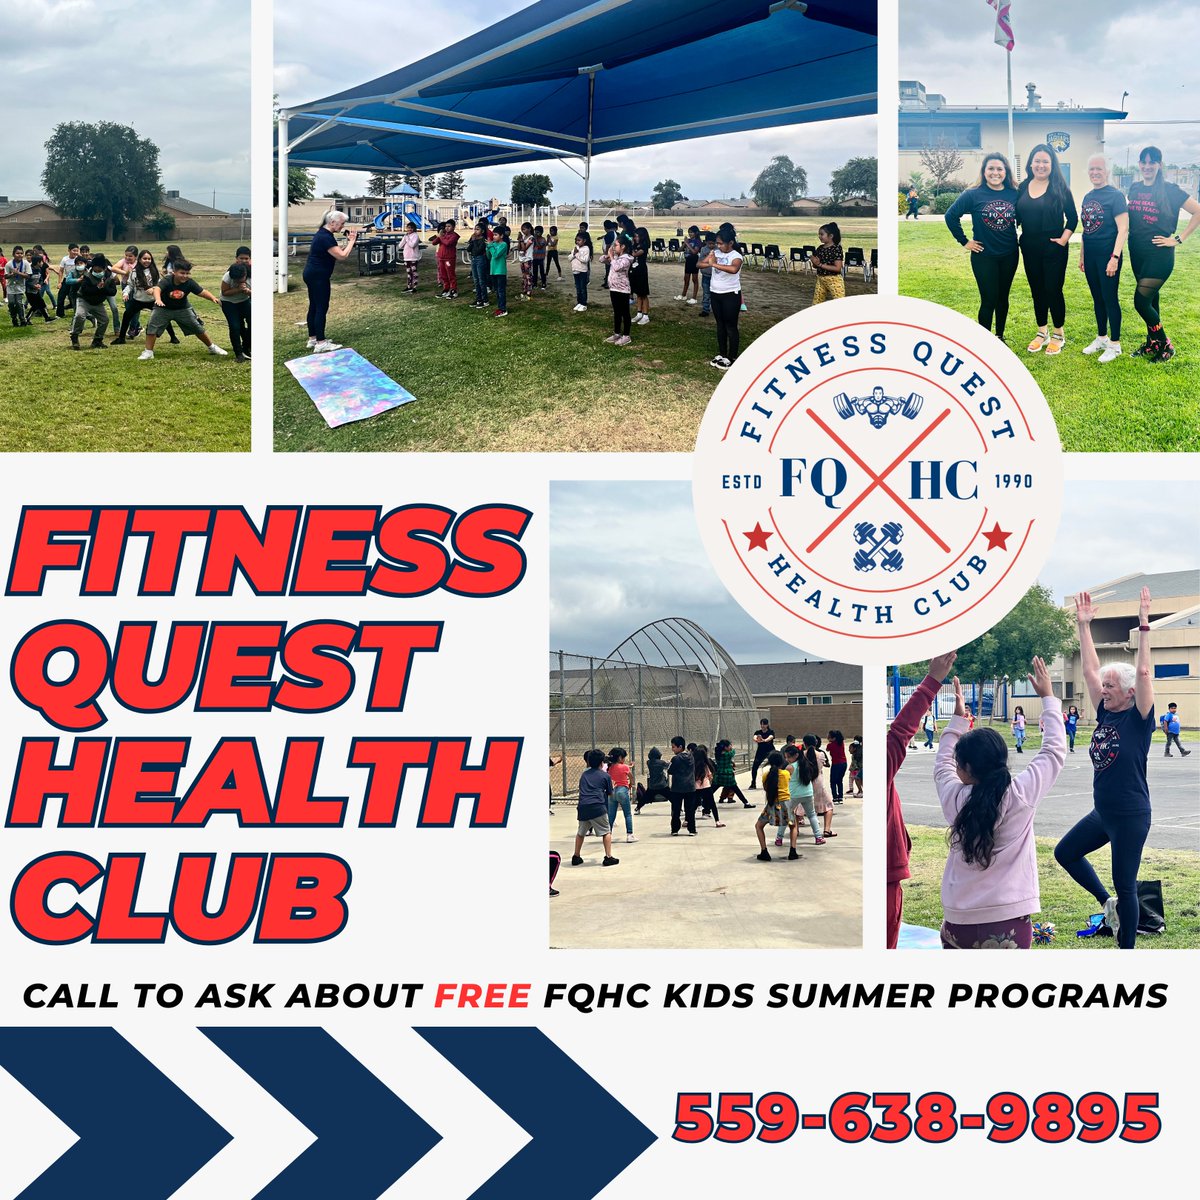 Thank you instructors from Fitness Health Club for visiting Martinez Elementary! Students learned Zumba, Yoga & Fitness 101.
Contact Fitness Health Club: 559-638-9895, to sign up your children for FQHC Kids Summer Programs sponsored by Sierra Kings Health Care District.